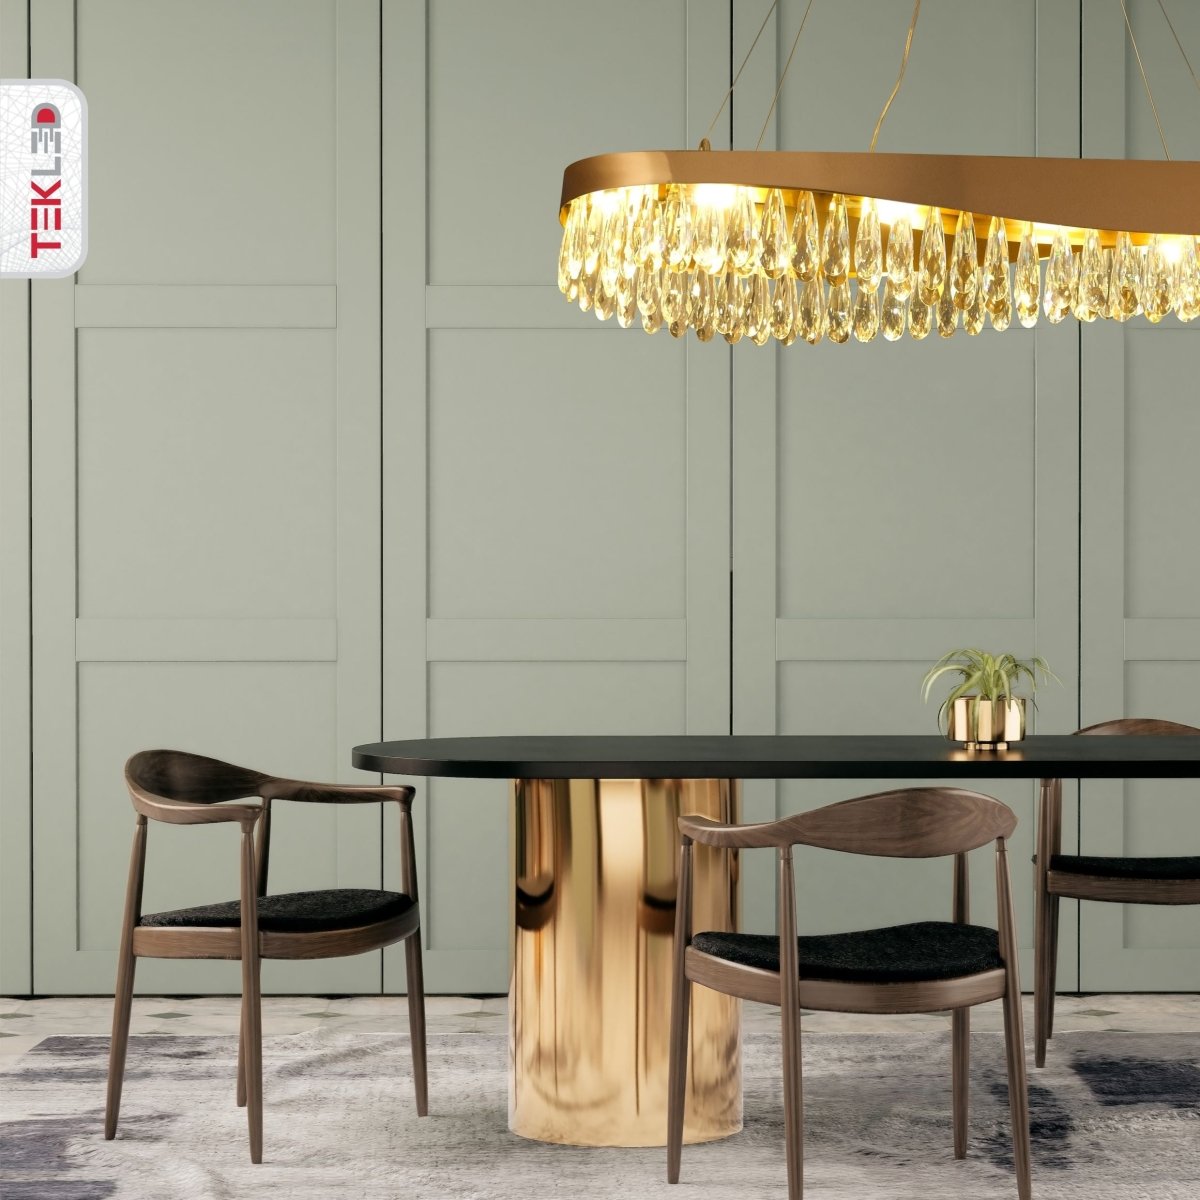 More interior usage of Faceted Long Pear Crystal Gold Metal Island Chandelier L1100 with 12xG9 Fitting | TEKLED 156-19574